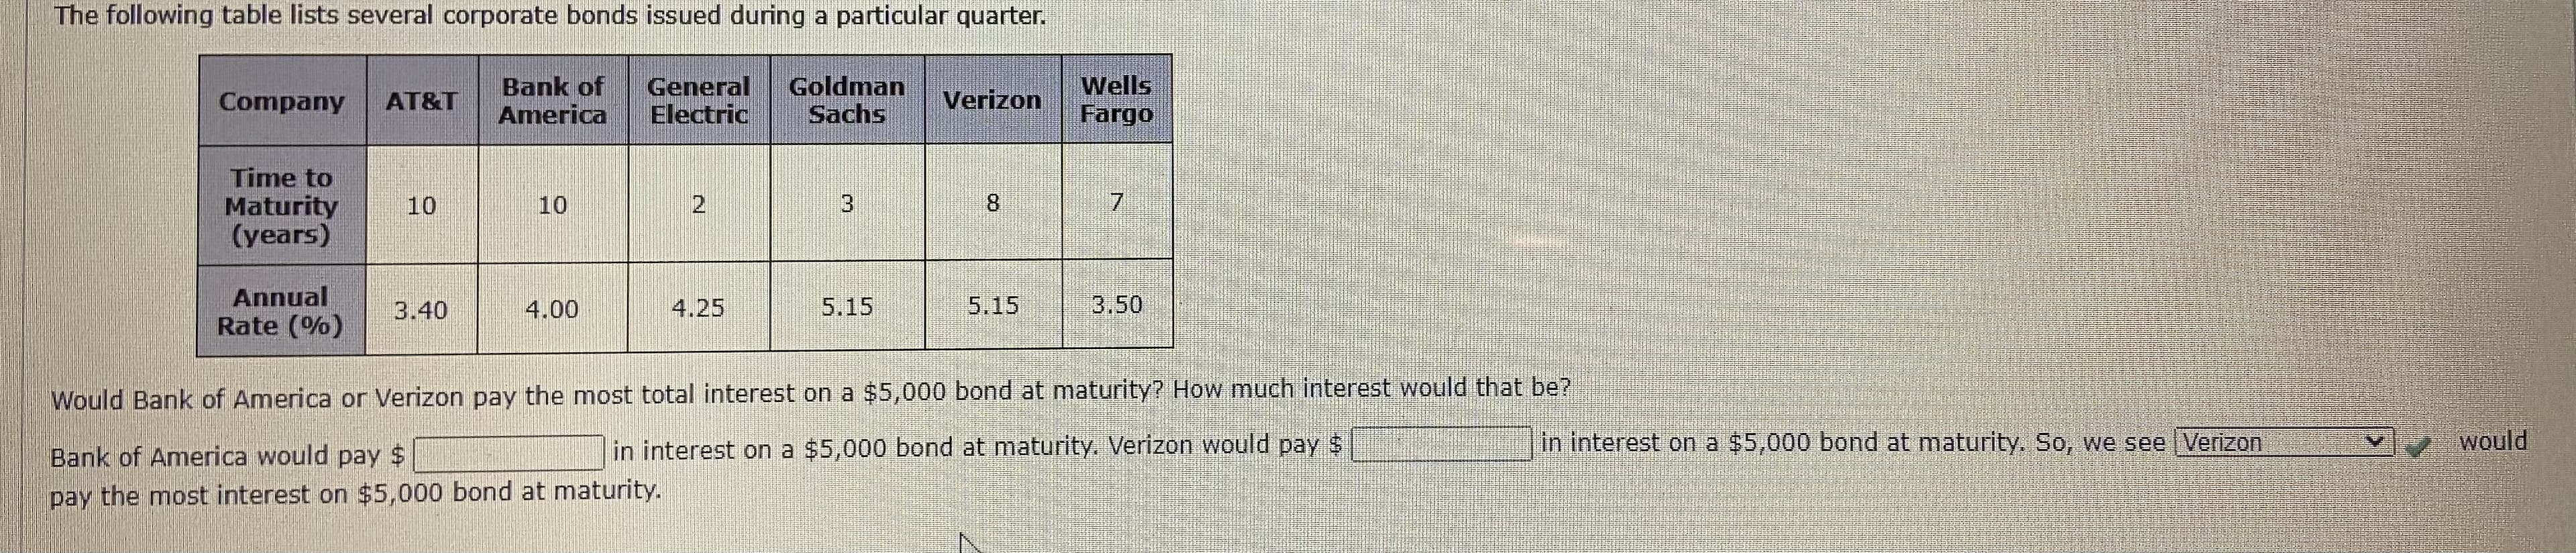 Would Bank of America or Verizon pay the most total interest on a $5,000 bond at maturity? How much interest would that be?
Bank of America would pay $
in interest on a $5,000 bond at maturity. Verizon would pay $
in interest on a $5,000 bond at maturity. So, we see Verizon
would
pay the most interest on $5,000 bond at maturity.
